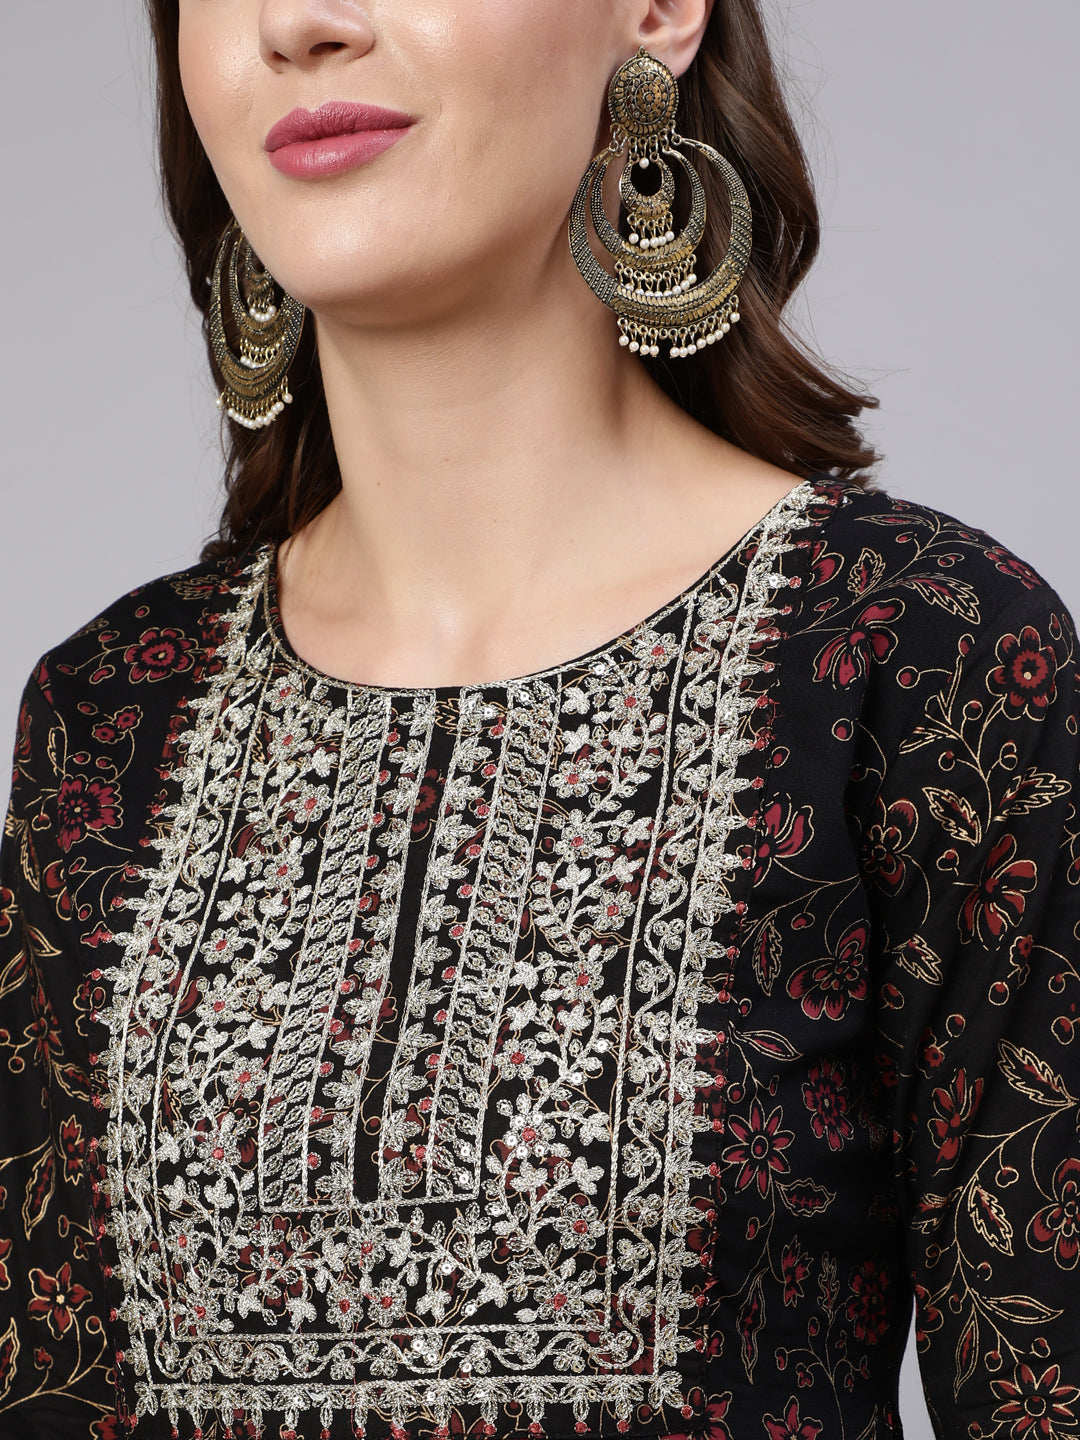 Women's Black Embroidered Flared Kurta With Trouser And Dupatta - Nayo Clothing